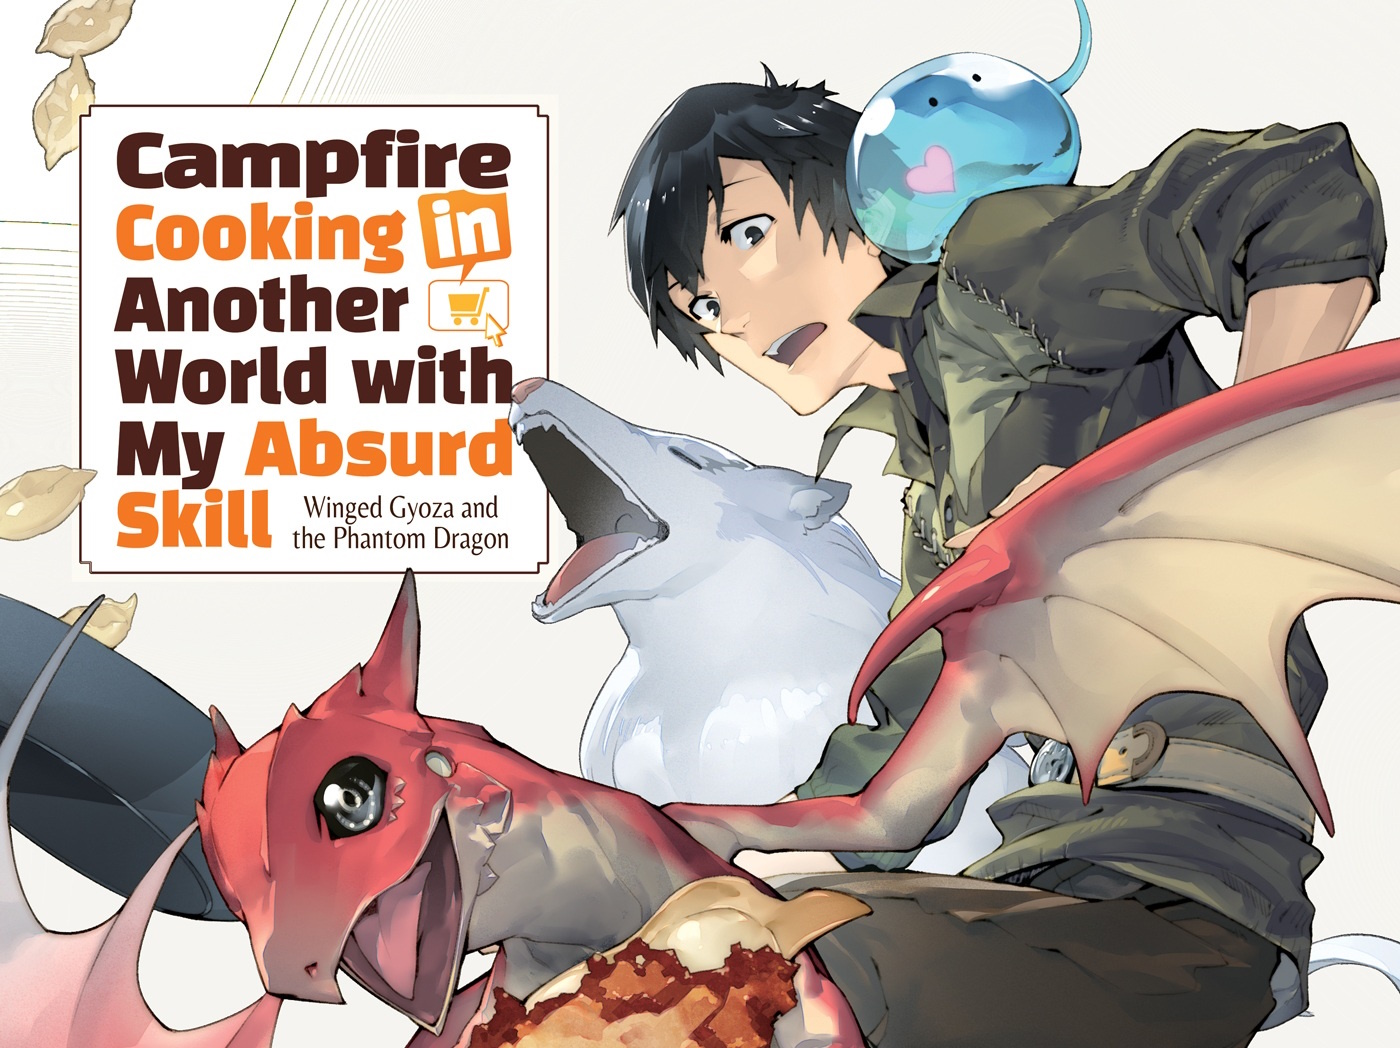 Watch Campfire Cooking in Another World with My Absurd Skill - Crunchyroll